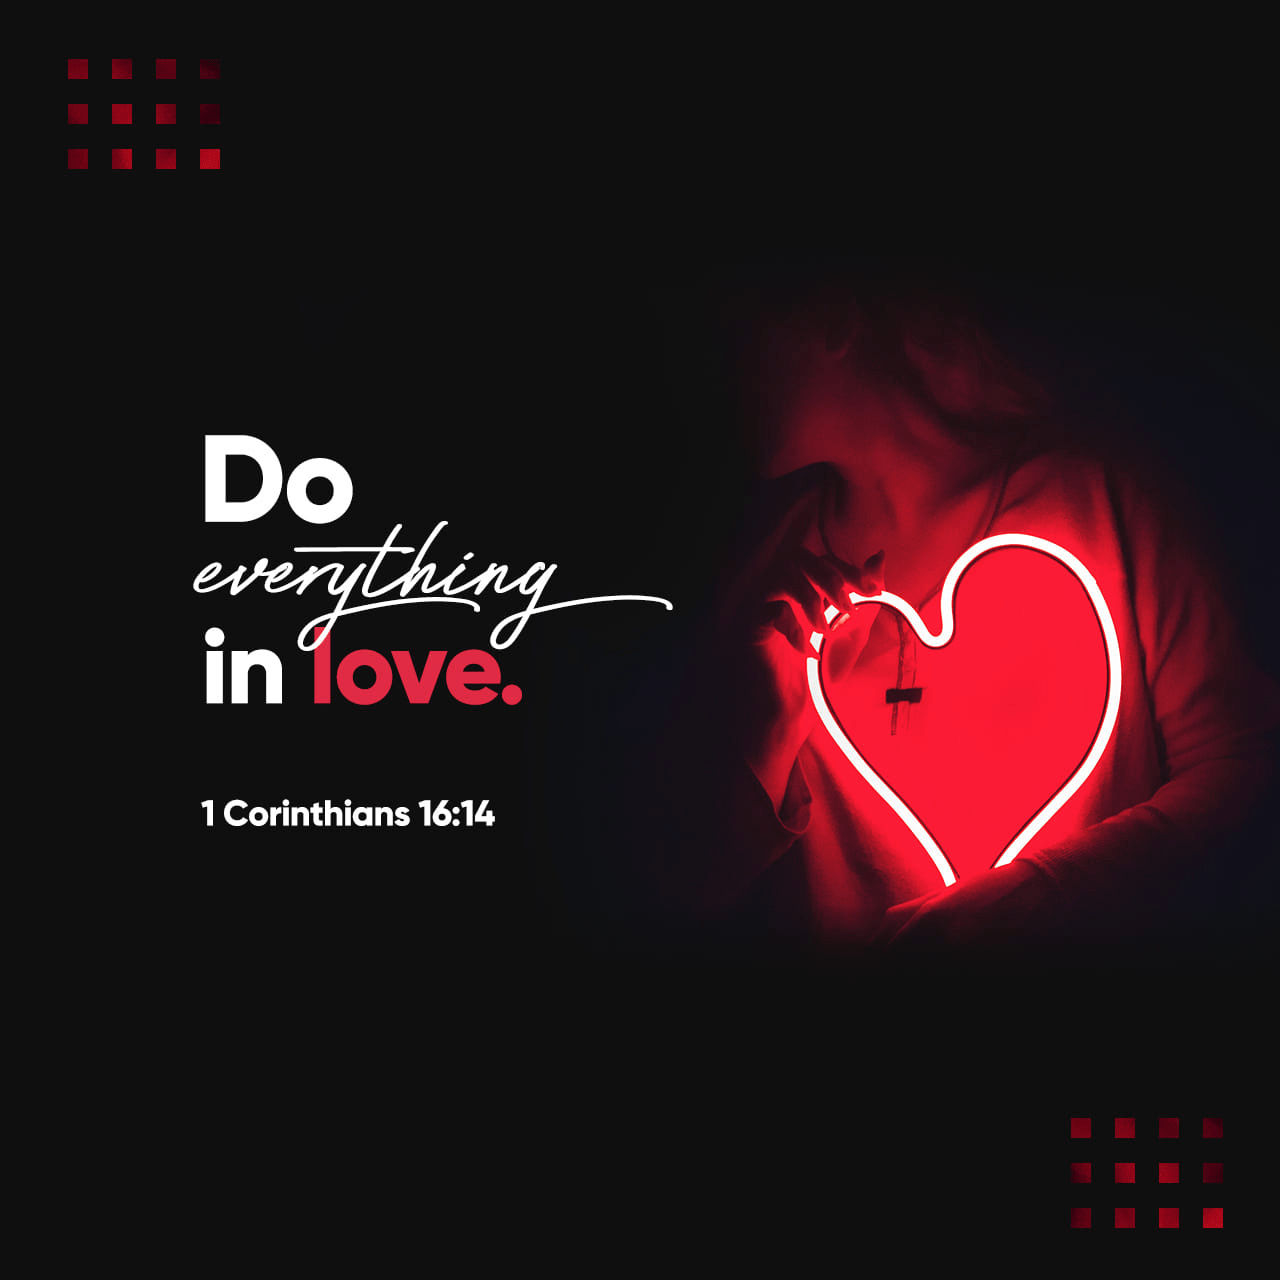 VOTD December 2 - “Be on the alert, stand firm in the faith, act like men, be strong. Let all that you do be done in love.”  ‭‭1 Corinthians‬ ‭16:13-14‬ ‭NASB‬‬ 